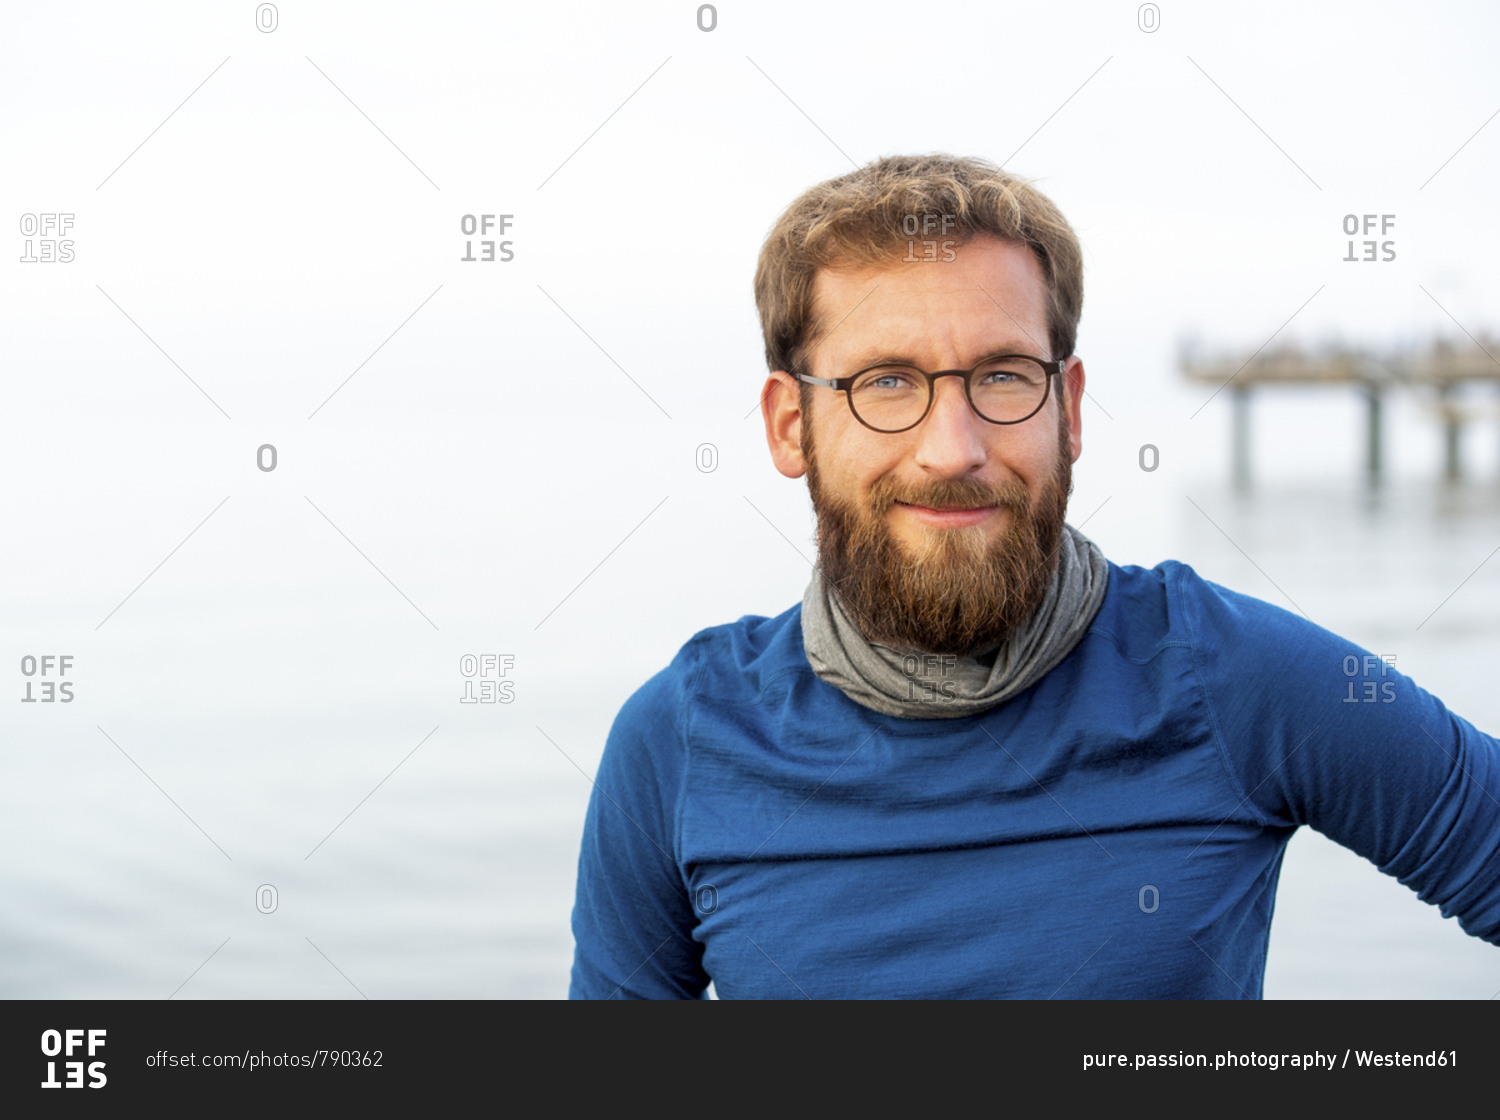 Germany- Rerik- portrait of bearded man in front of the sea wearing metal-rimmed spectacles